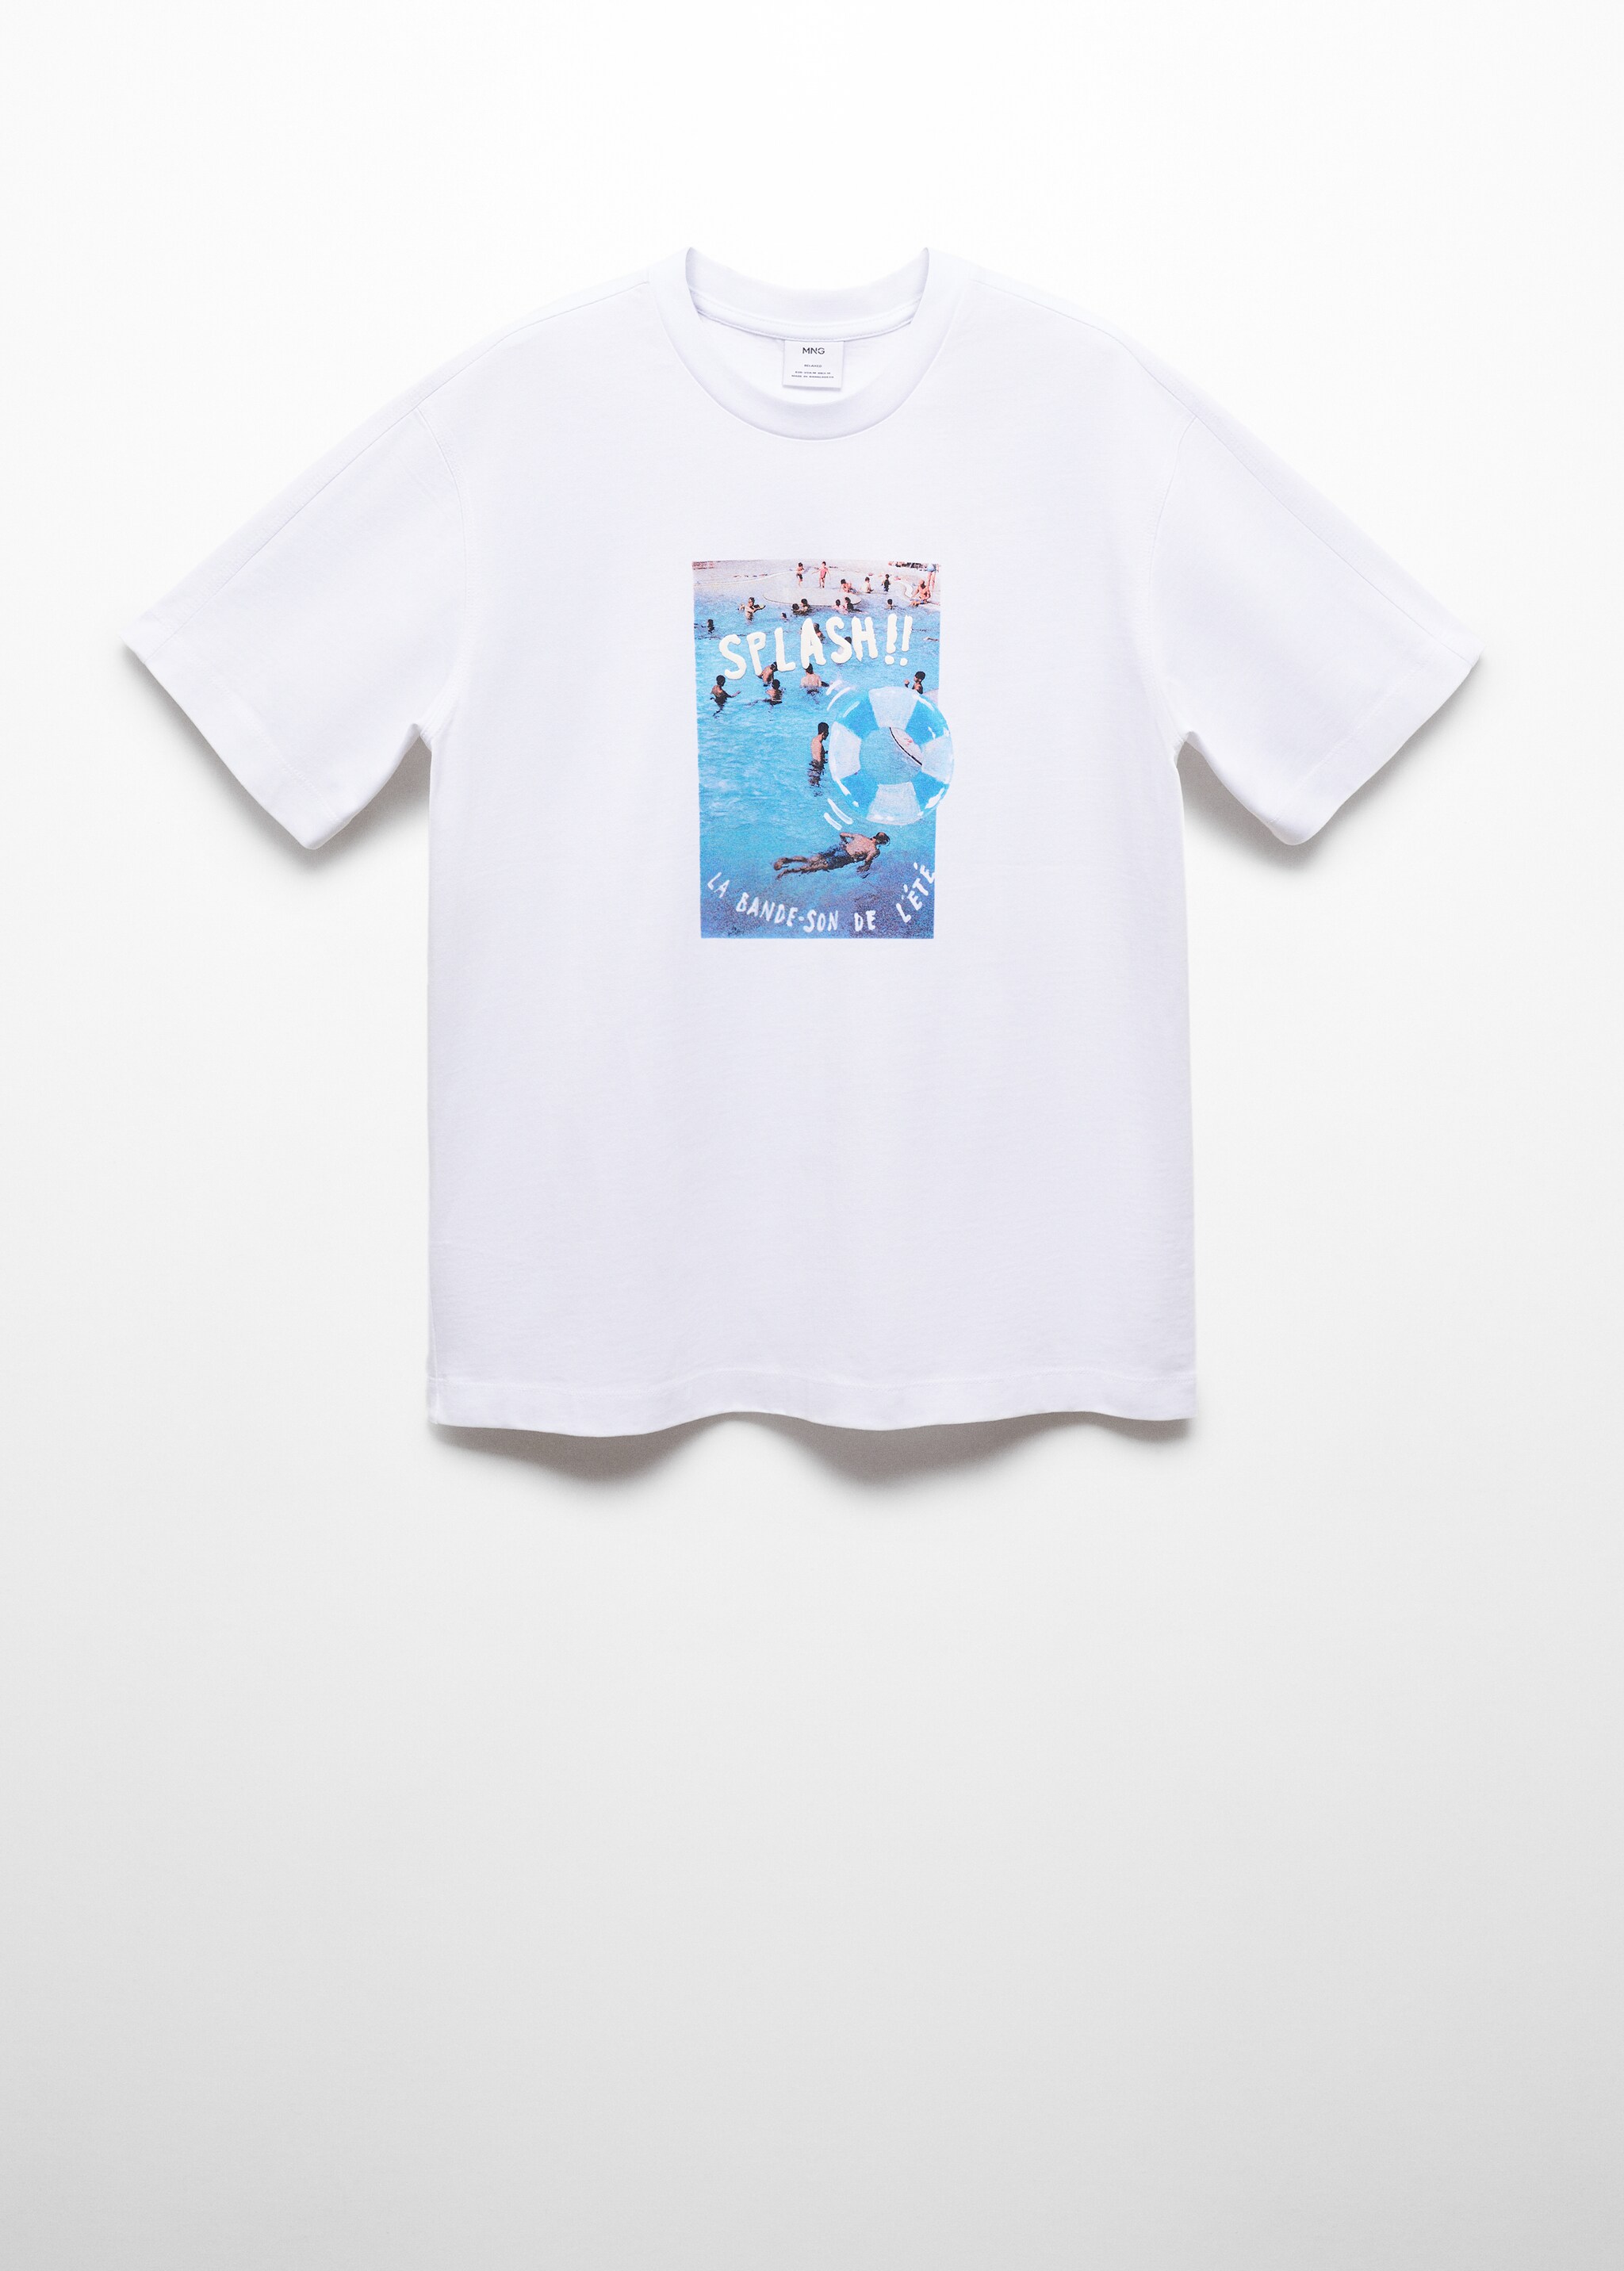 Cotton T-shirt printed with drawing - Article without model